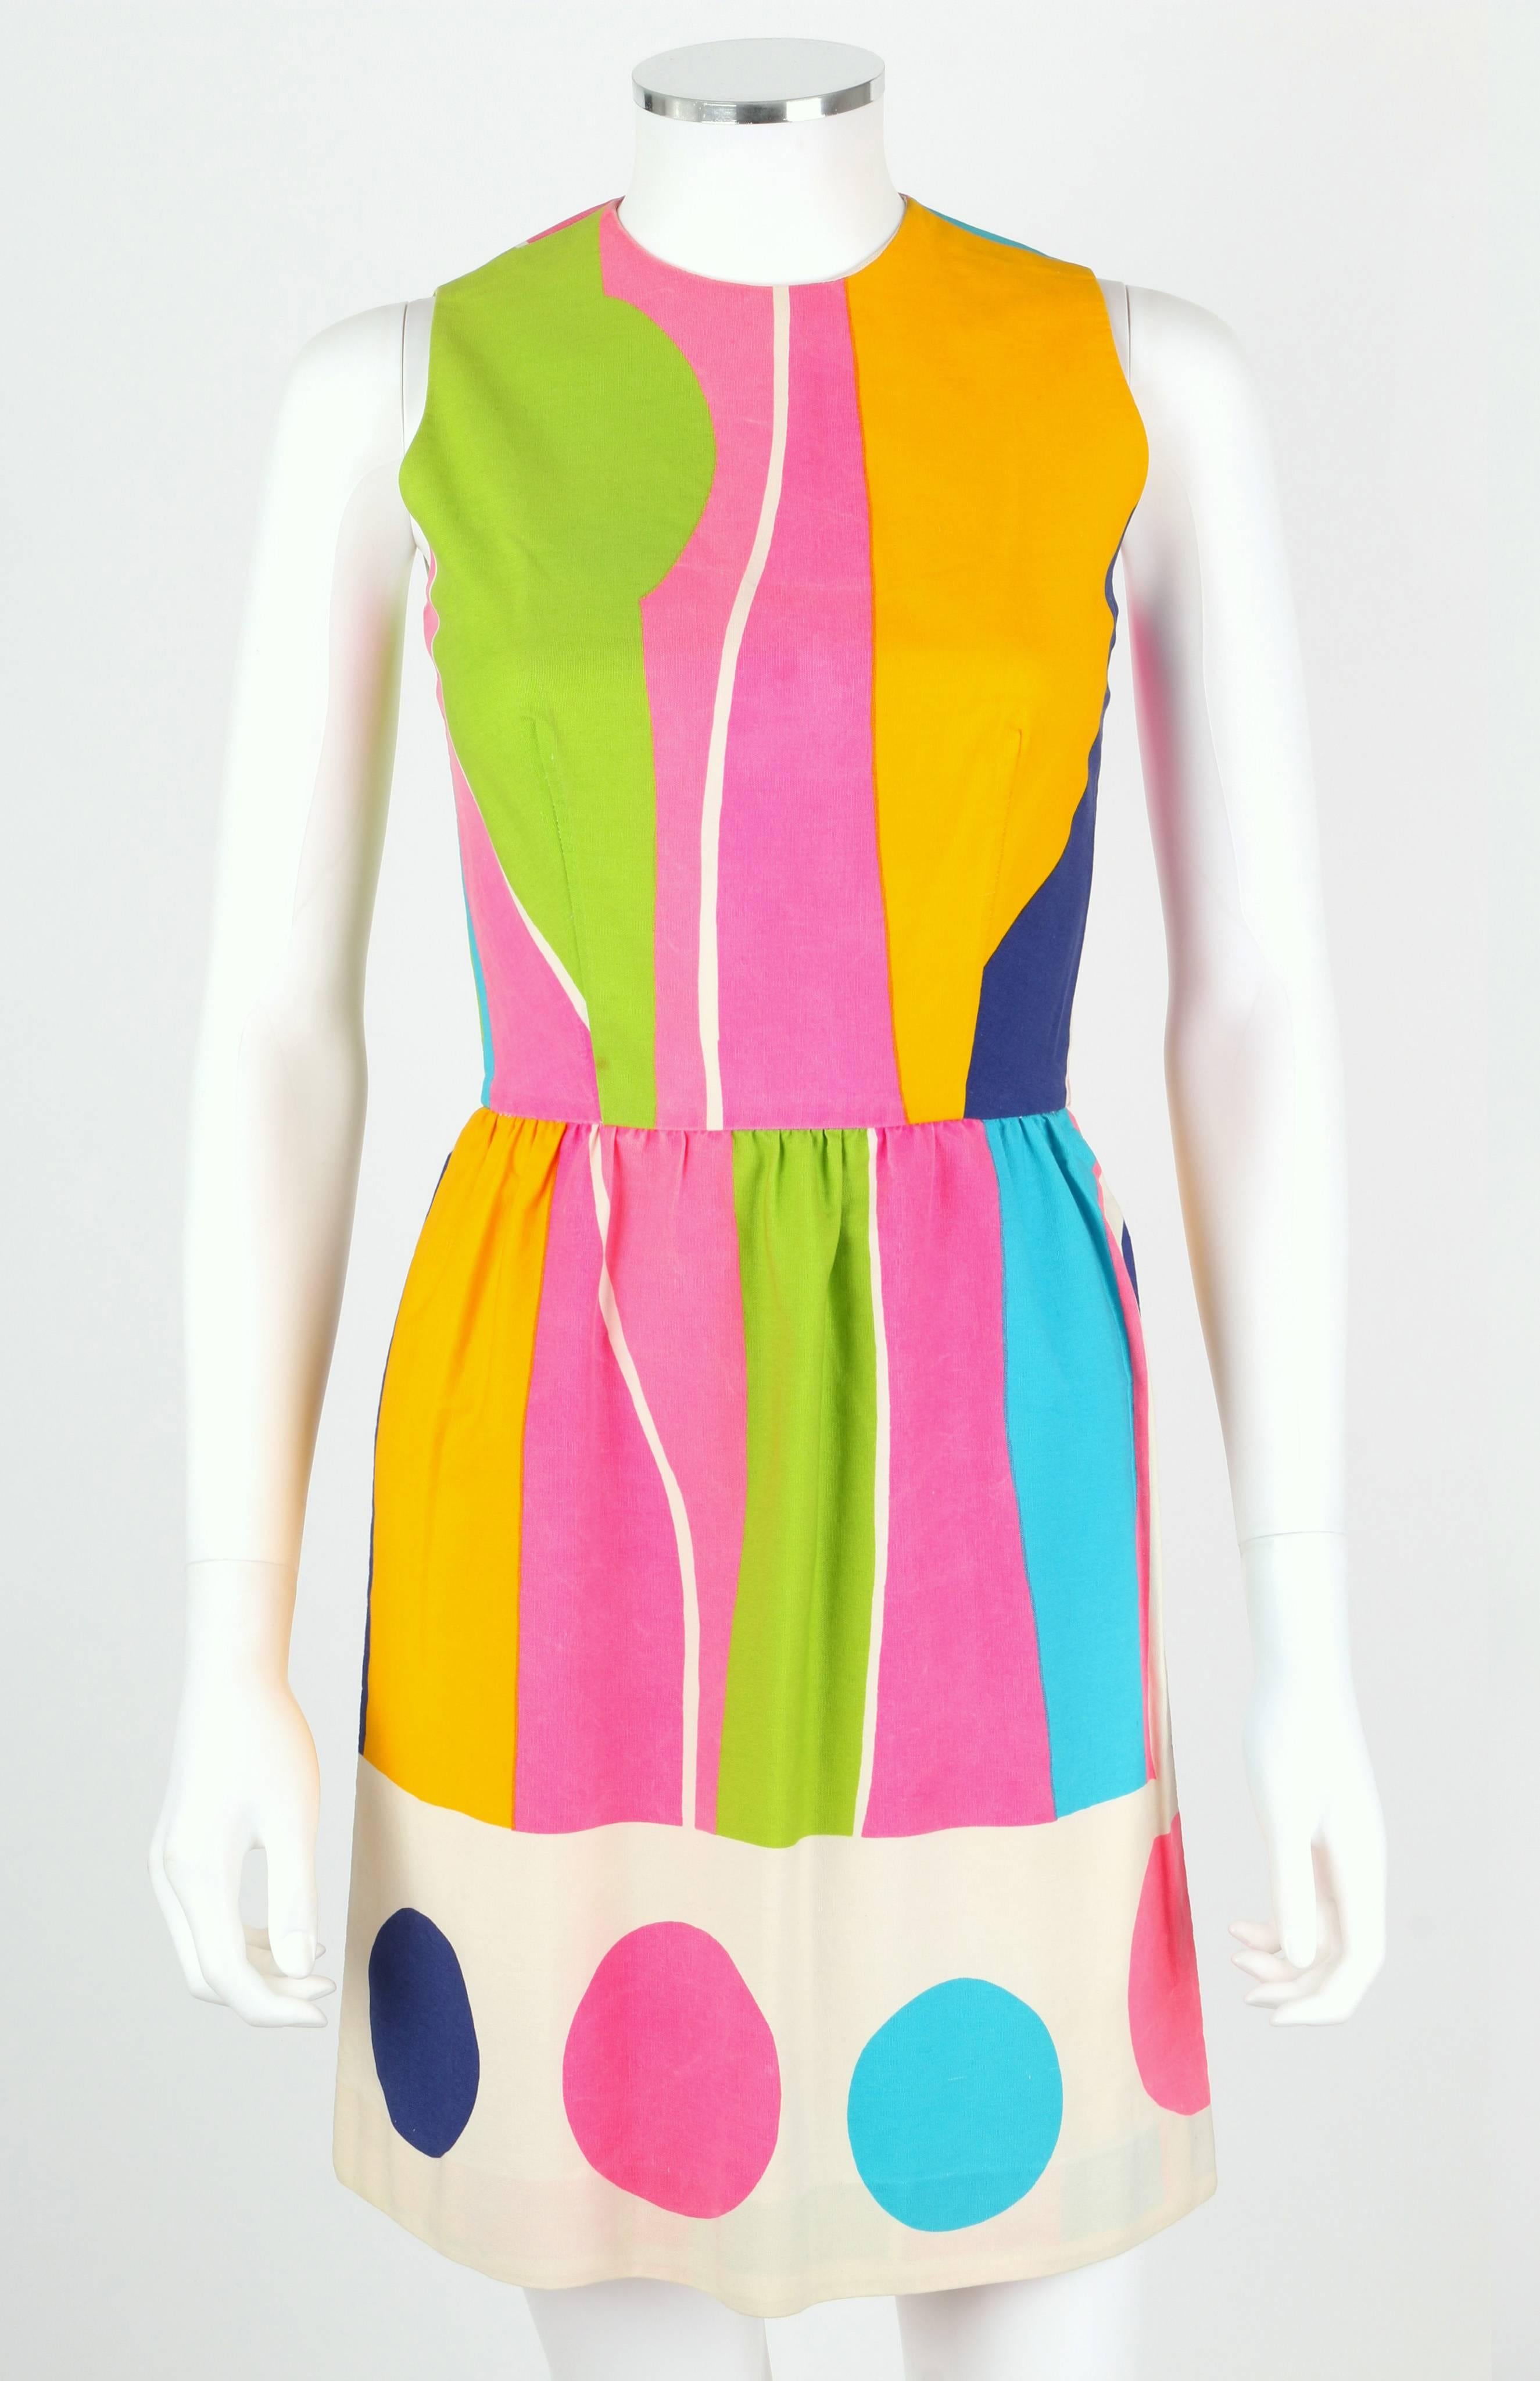 Vintage Lanz Originals c.1960's cotton canvas sleeveless shift dress. Bright multi-color abstract color-block print in shades of hot pink, yellow, lime green, teal, and navy blue with circle print boarder at hemline. Crew neckline. Gathered